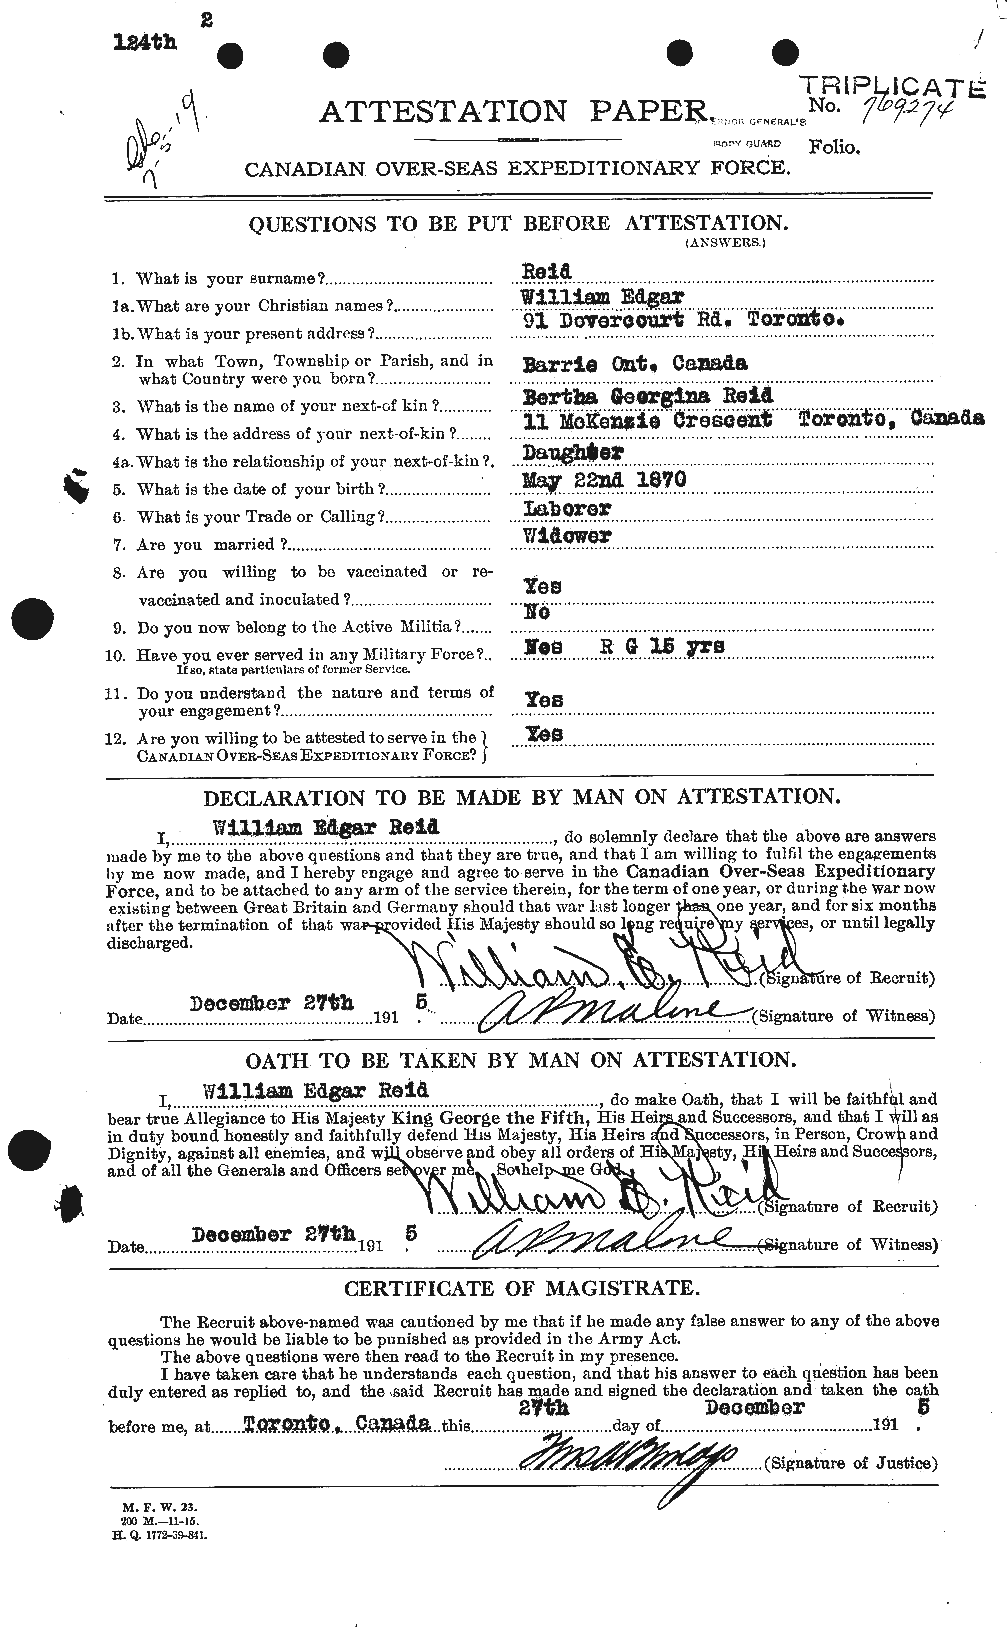 Personnel Records of the First World War - CEF 596980a